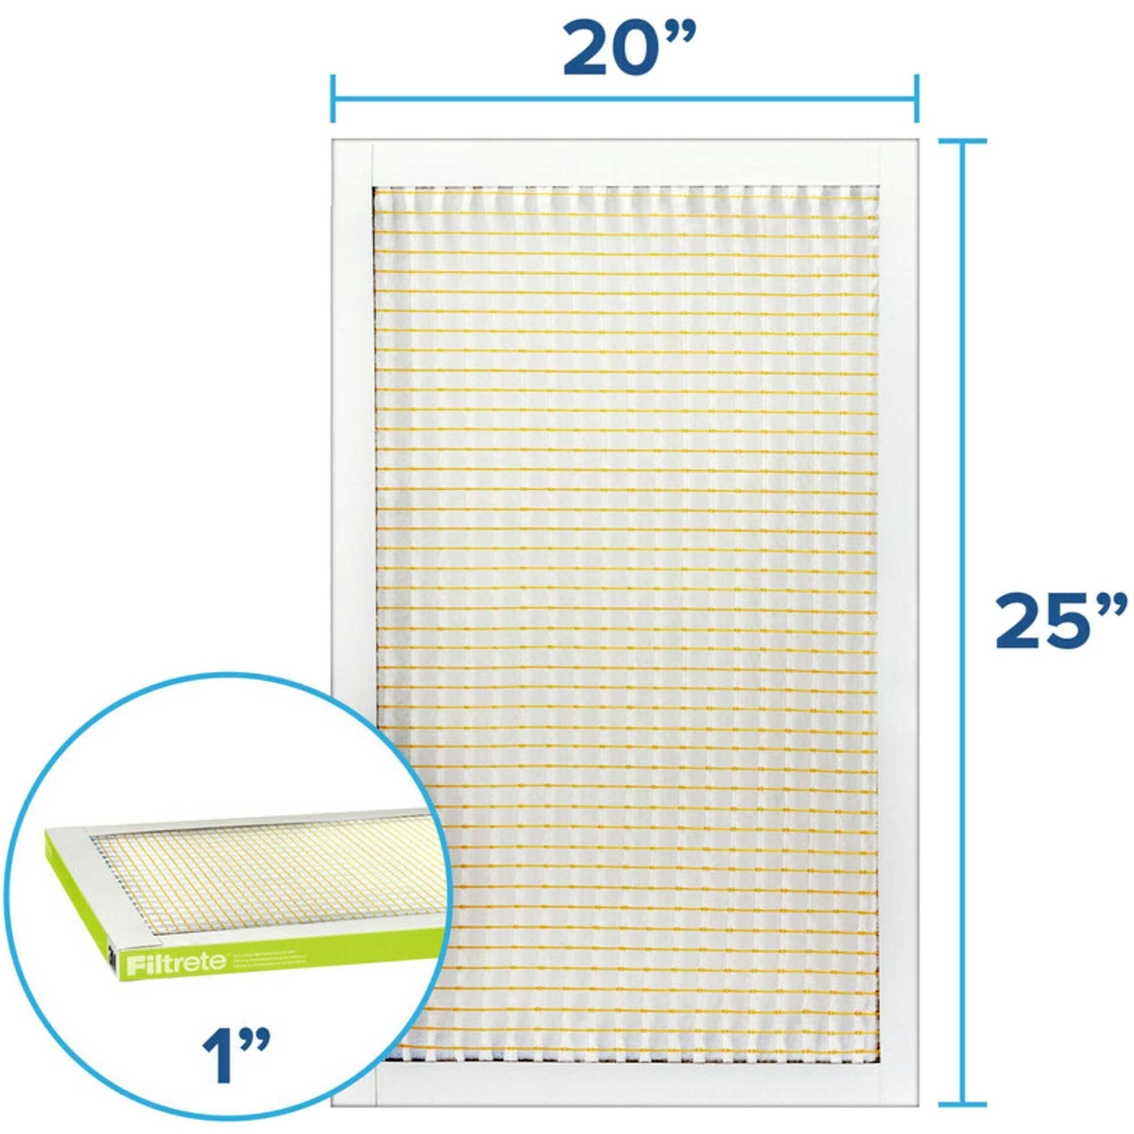 Filtrete Pollen Air Filter 600 MPR 20 x 25 x 1 in. 1 pk. - Image 2 of 6